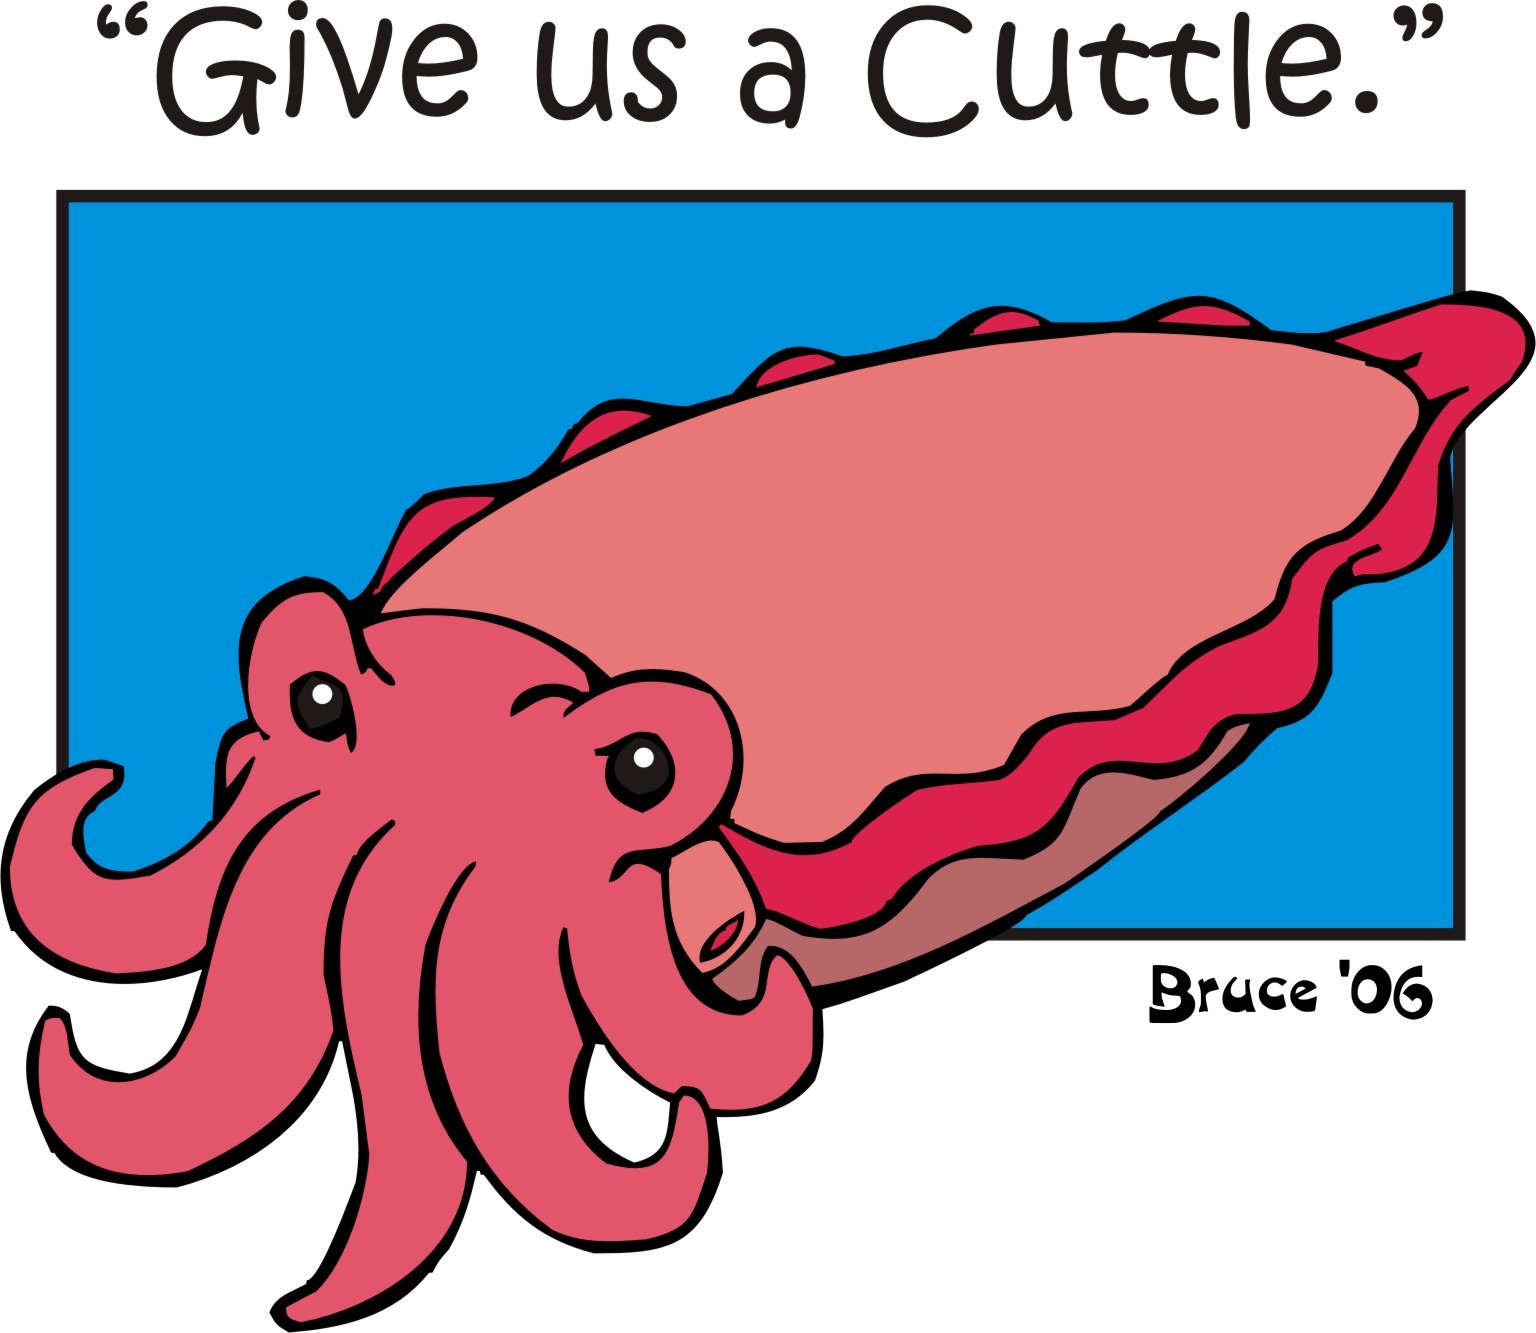 give_us_a_cuttle